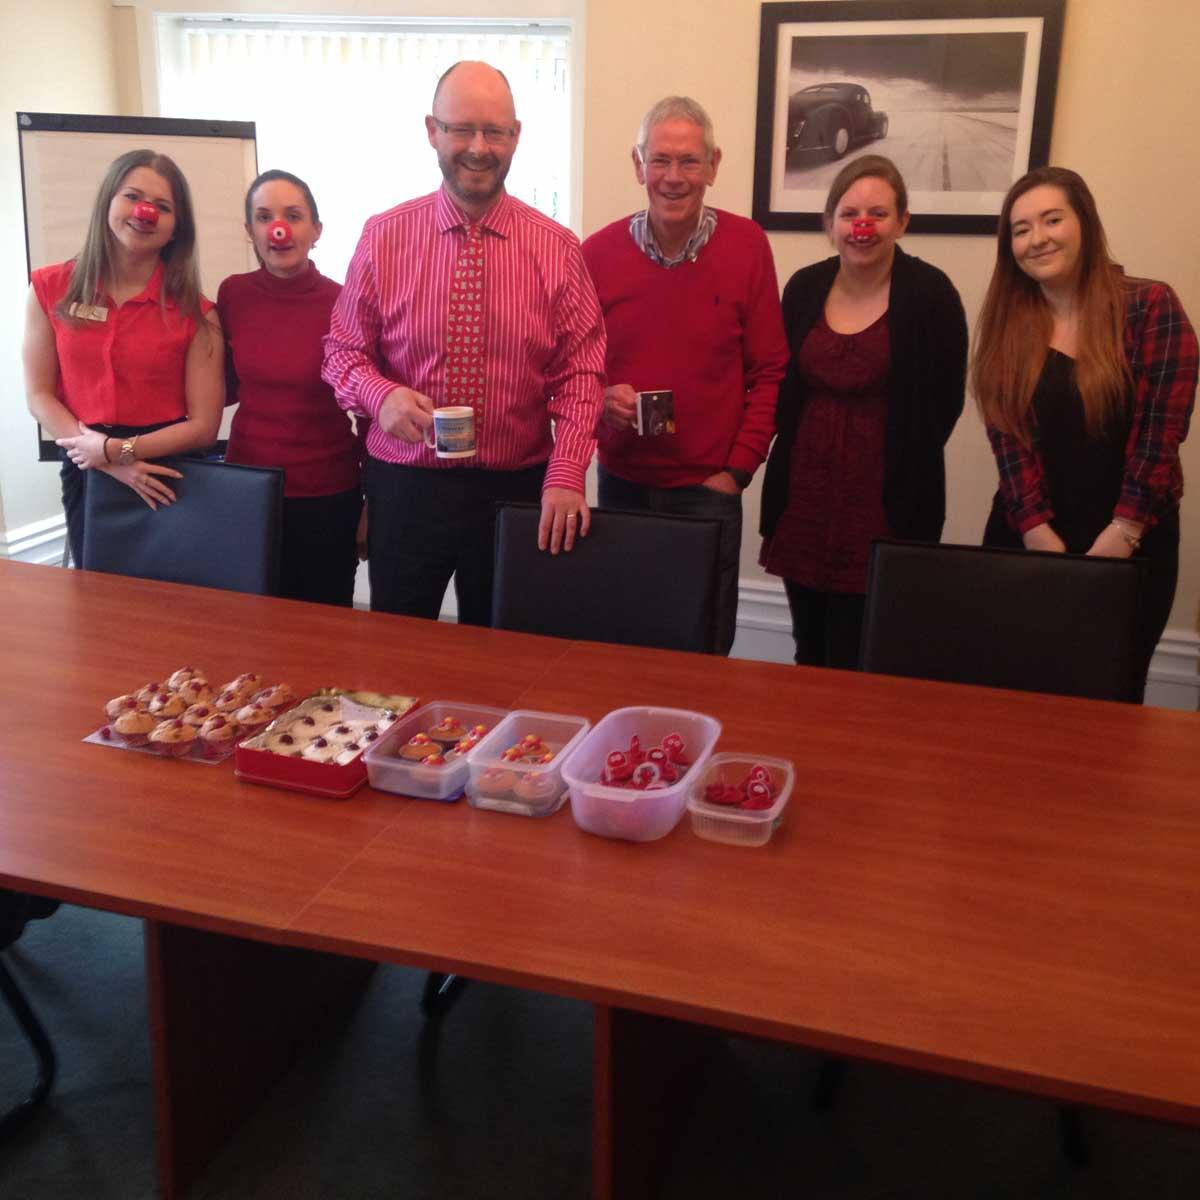 Coles Miller Solicitors LLP hold a Great British Bake Off to raise cash for Comic Relief